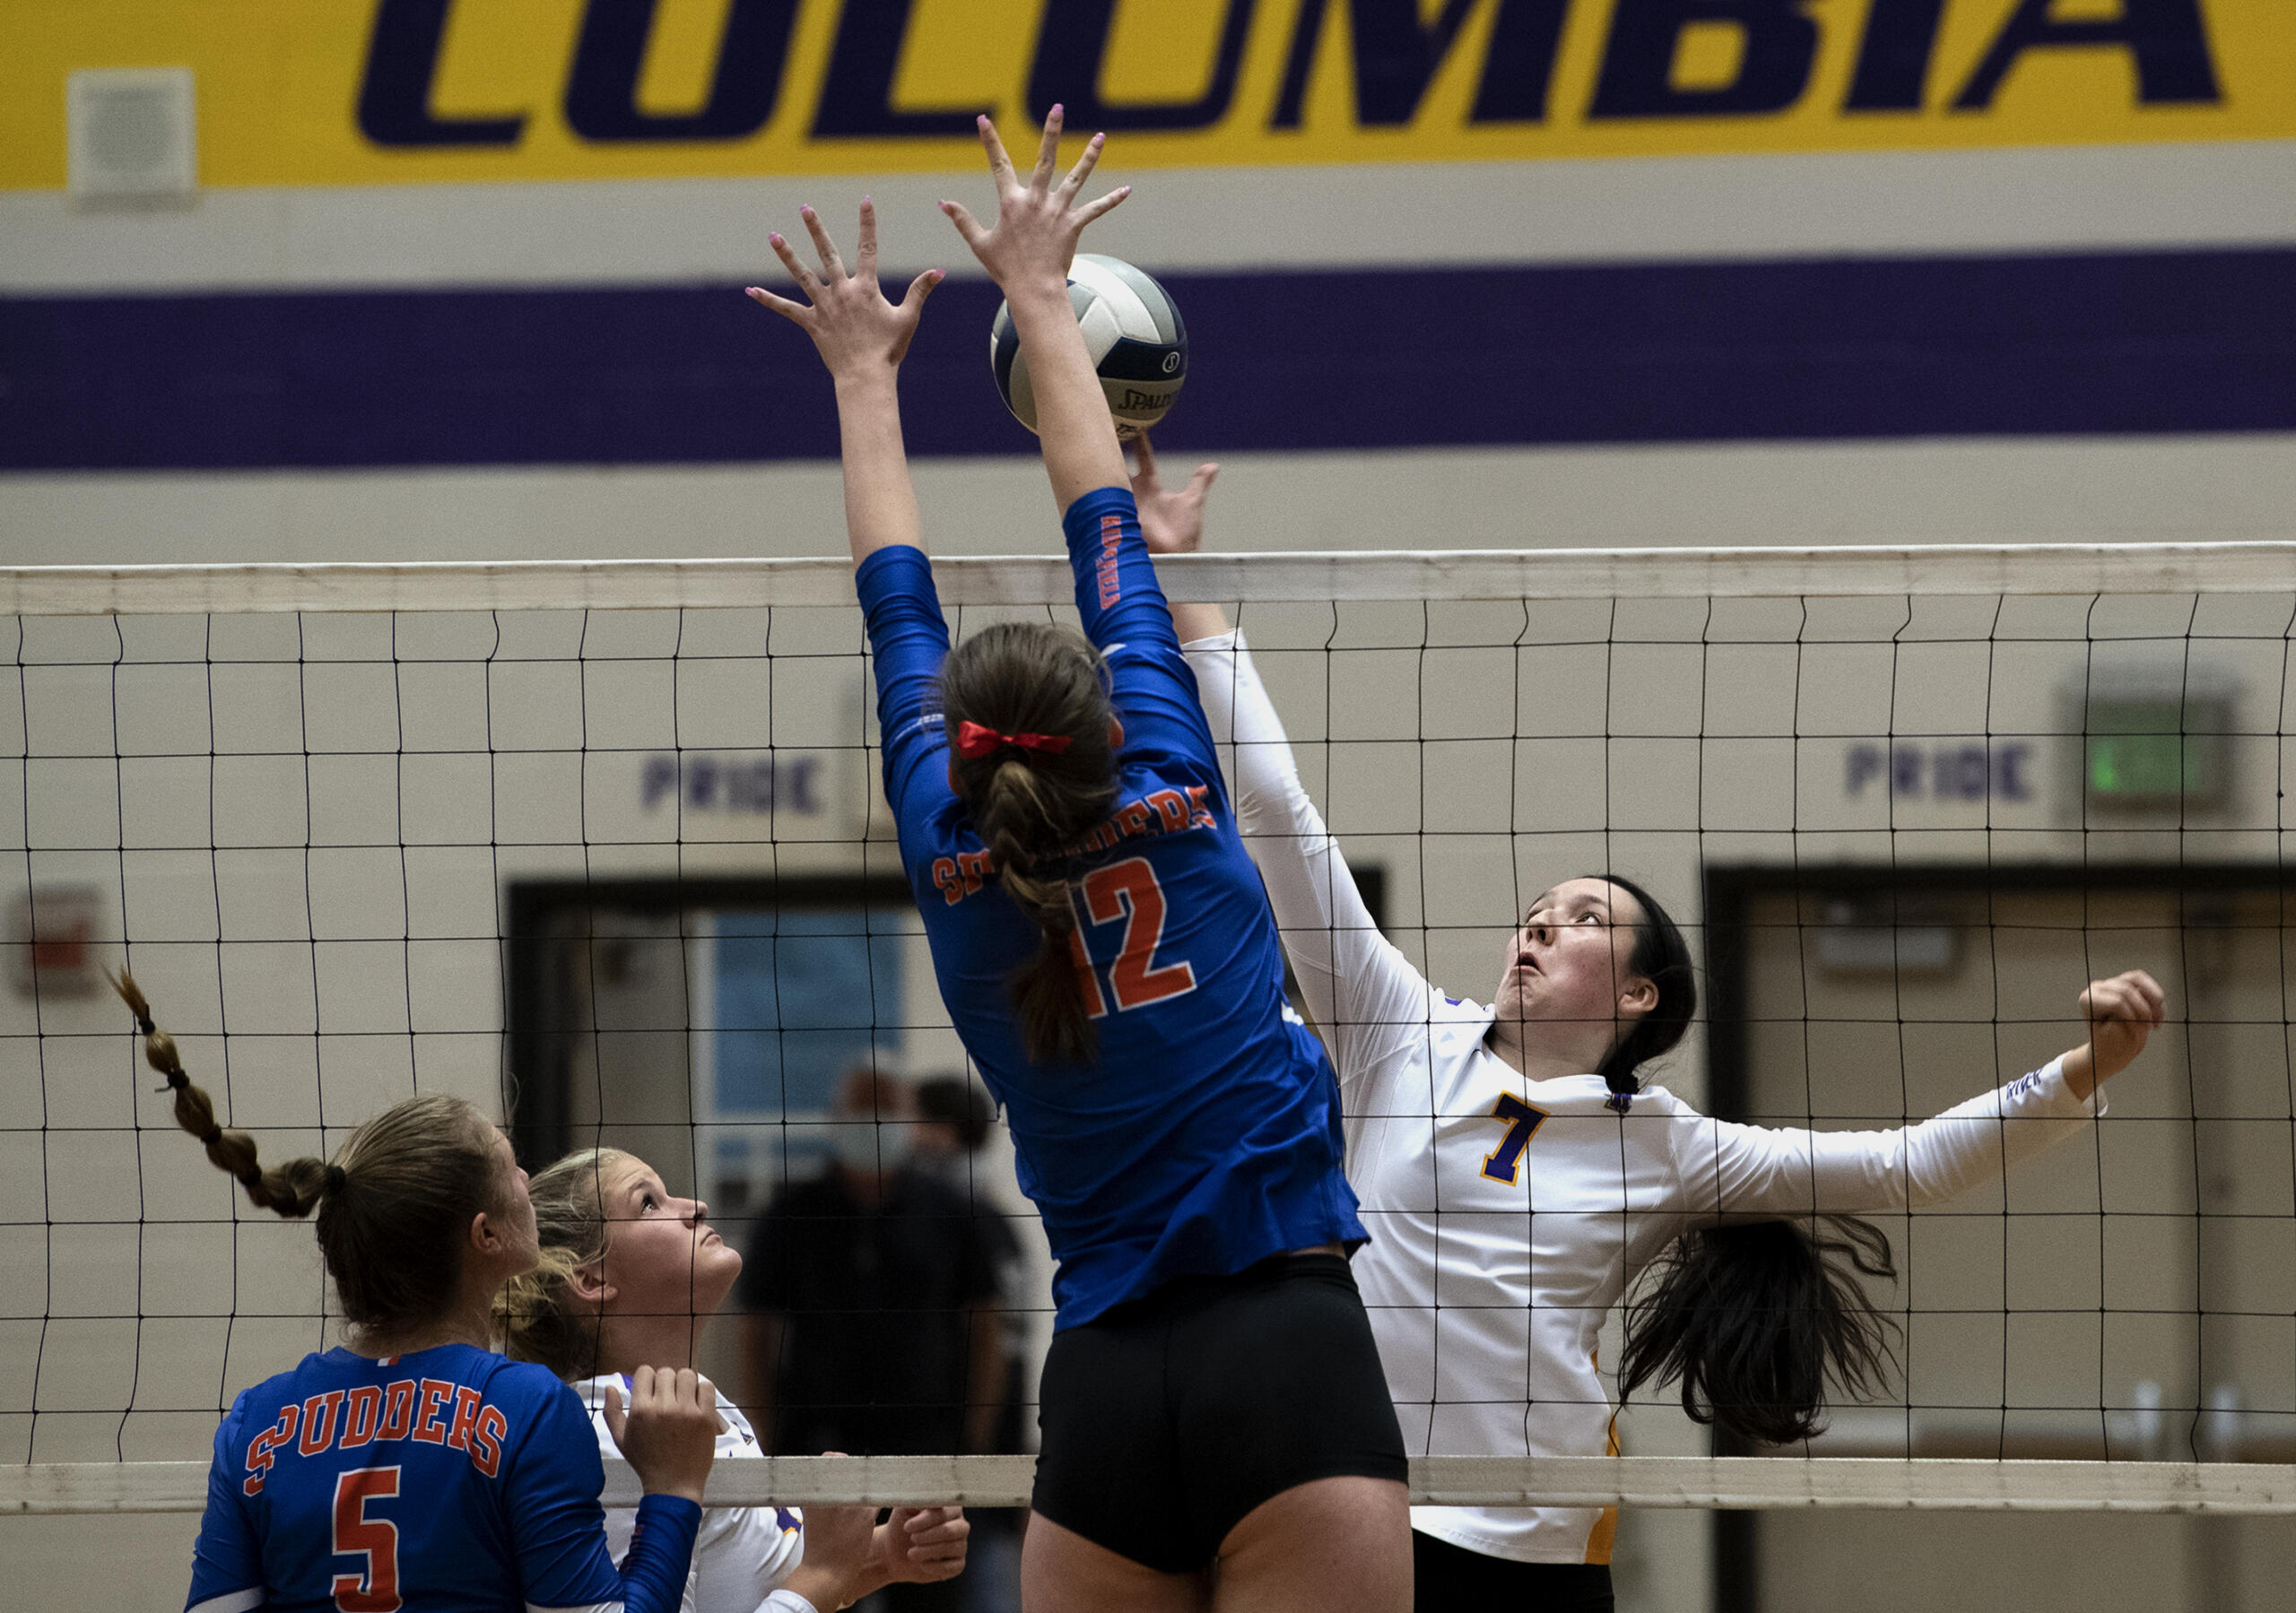 Ridgefield’s Emily Vossenkuhl, front, tries to block a tip from Columbia River’s Aaliyah Turner during a volleyball match Sept. 21 at Columbia River High School. Thursday, Columbia River avenged that earlier loss with a 3-1 win over Ridgefield to snap the Spudders' 51-match win streak.